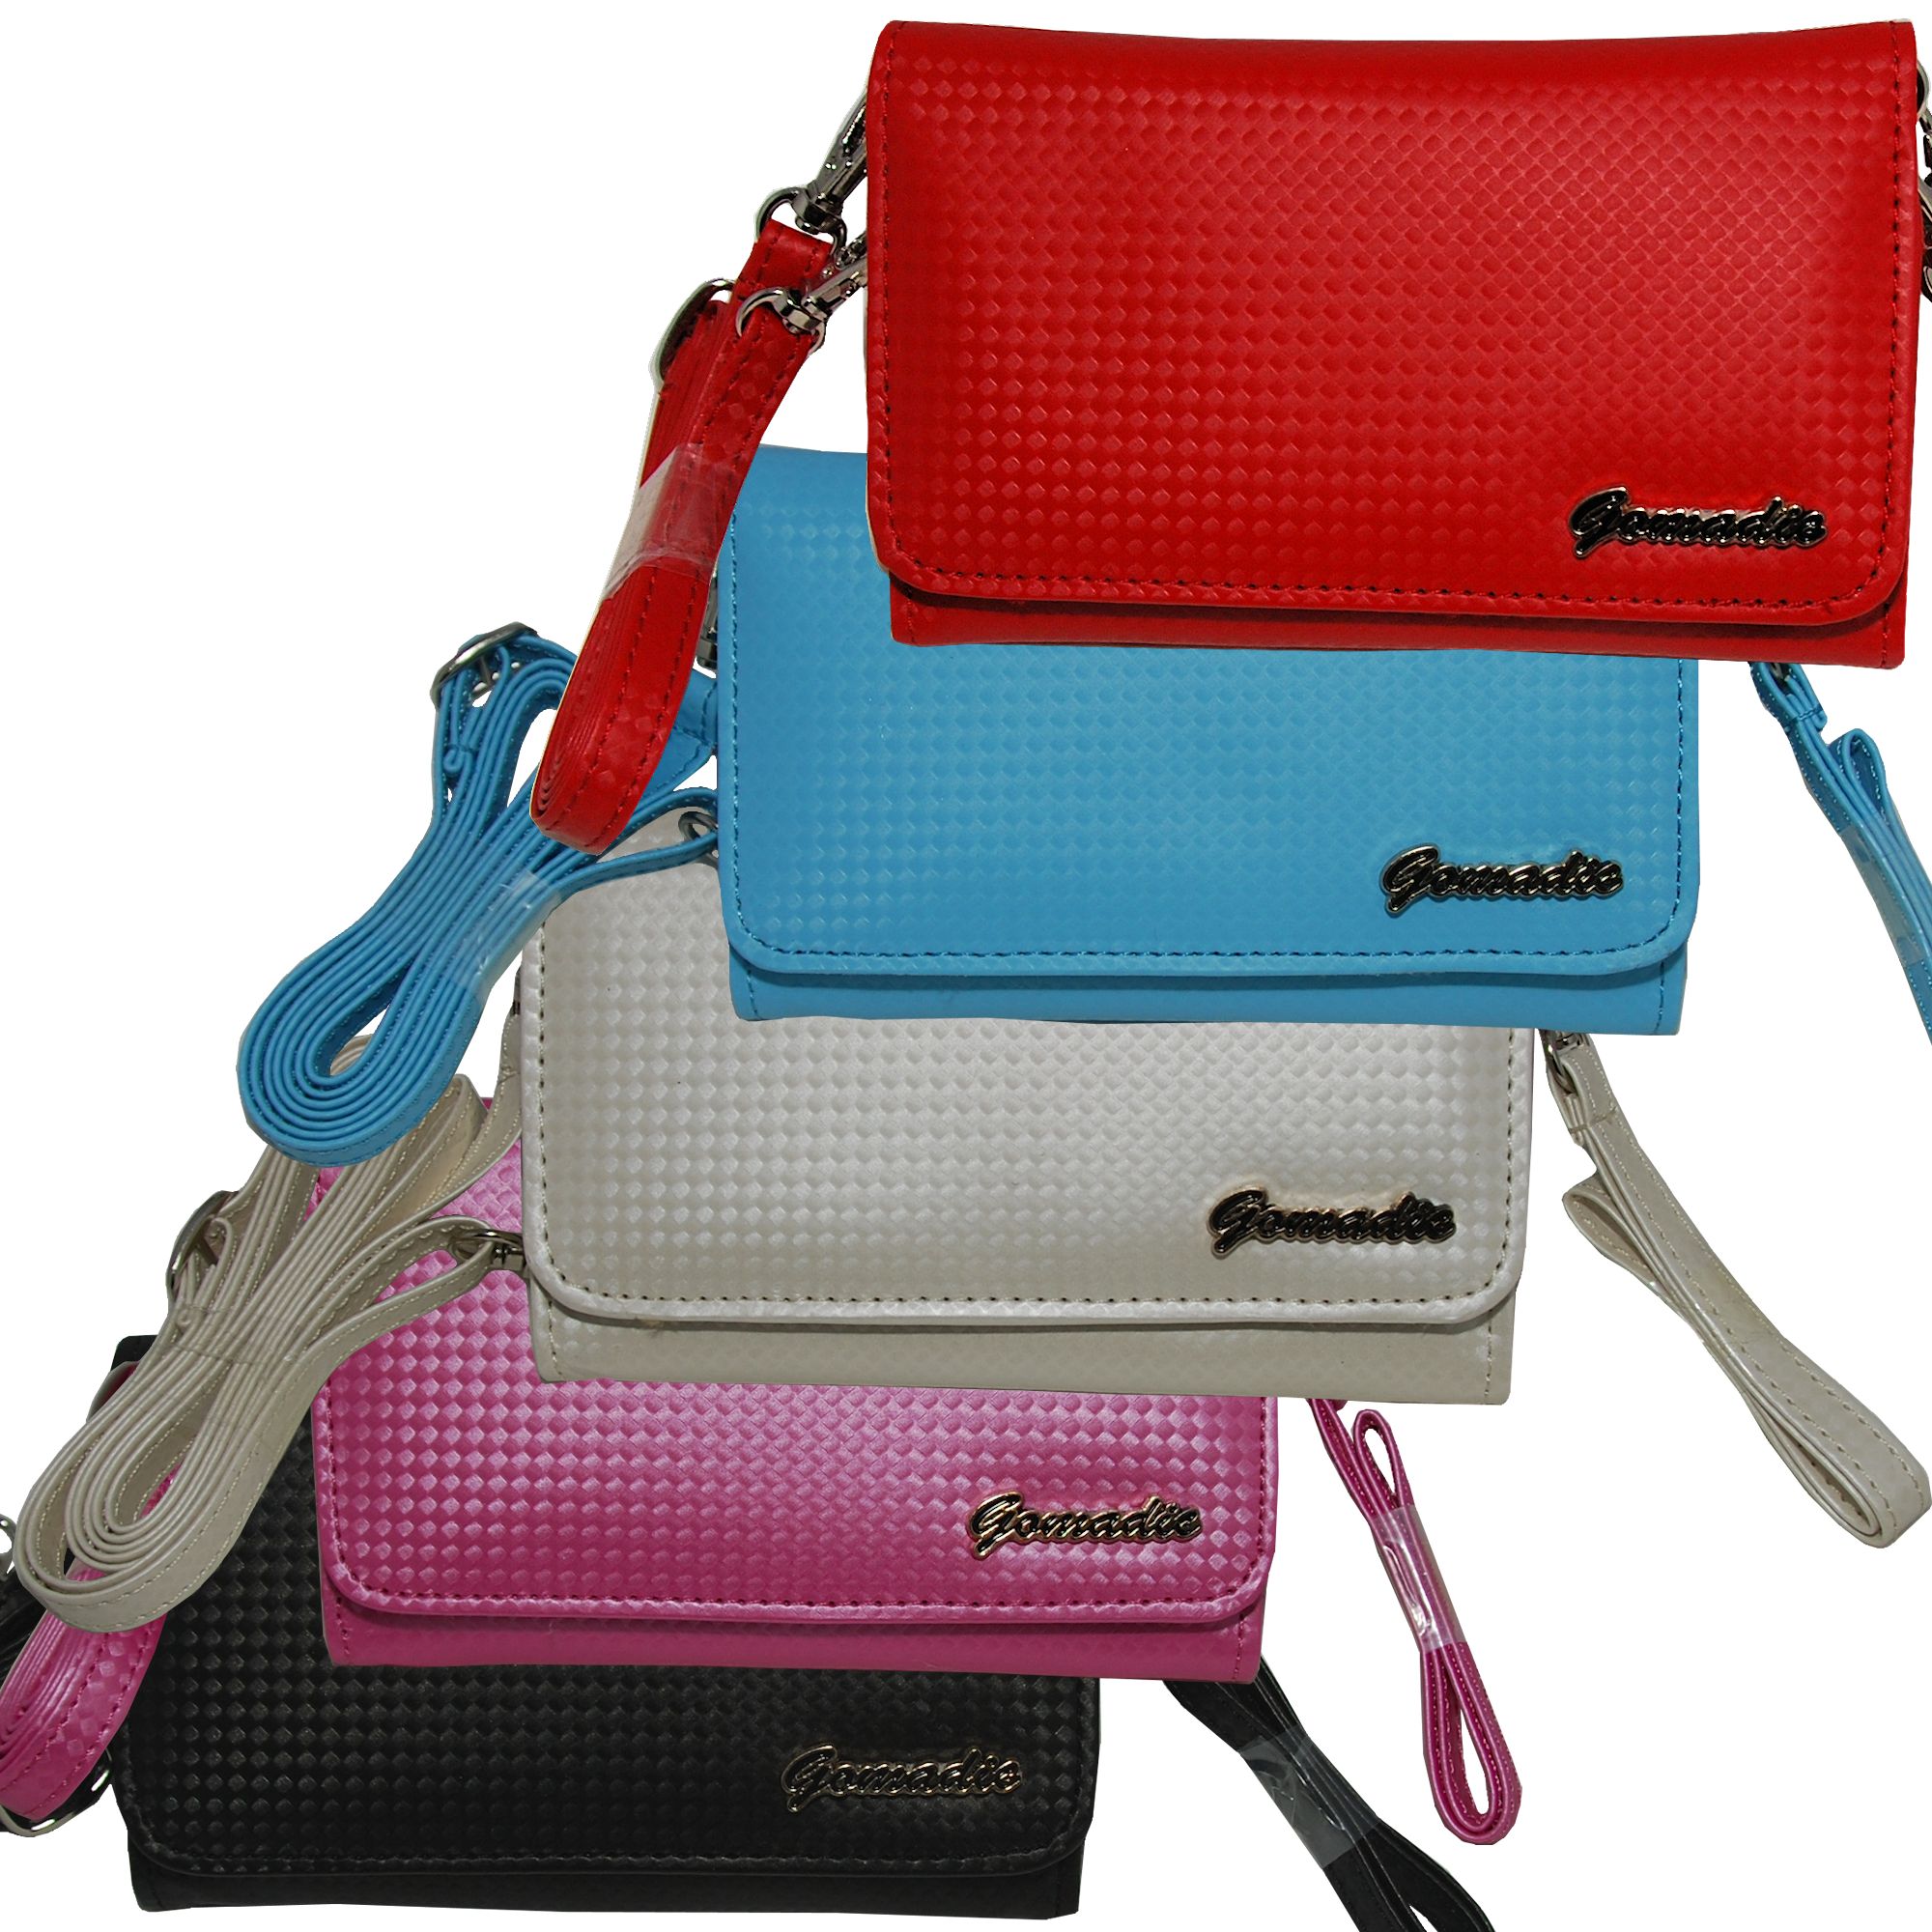 Purse Handbag Case for the Nokia 2135 2320 2330  - Color Options Blue Pink White Black and Red